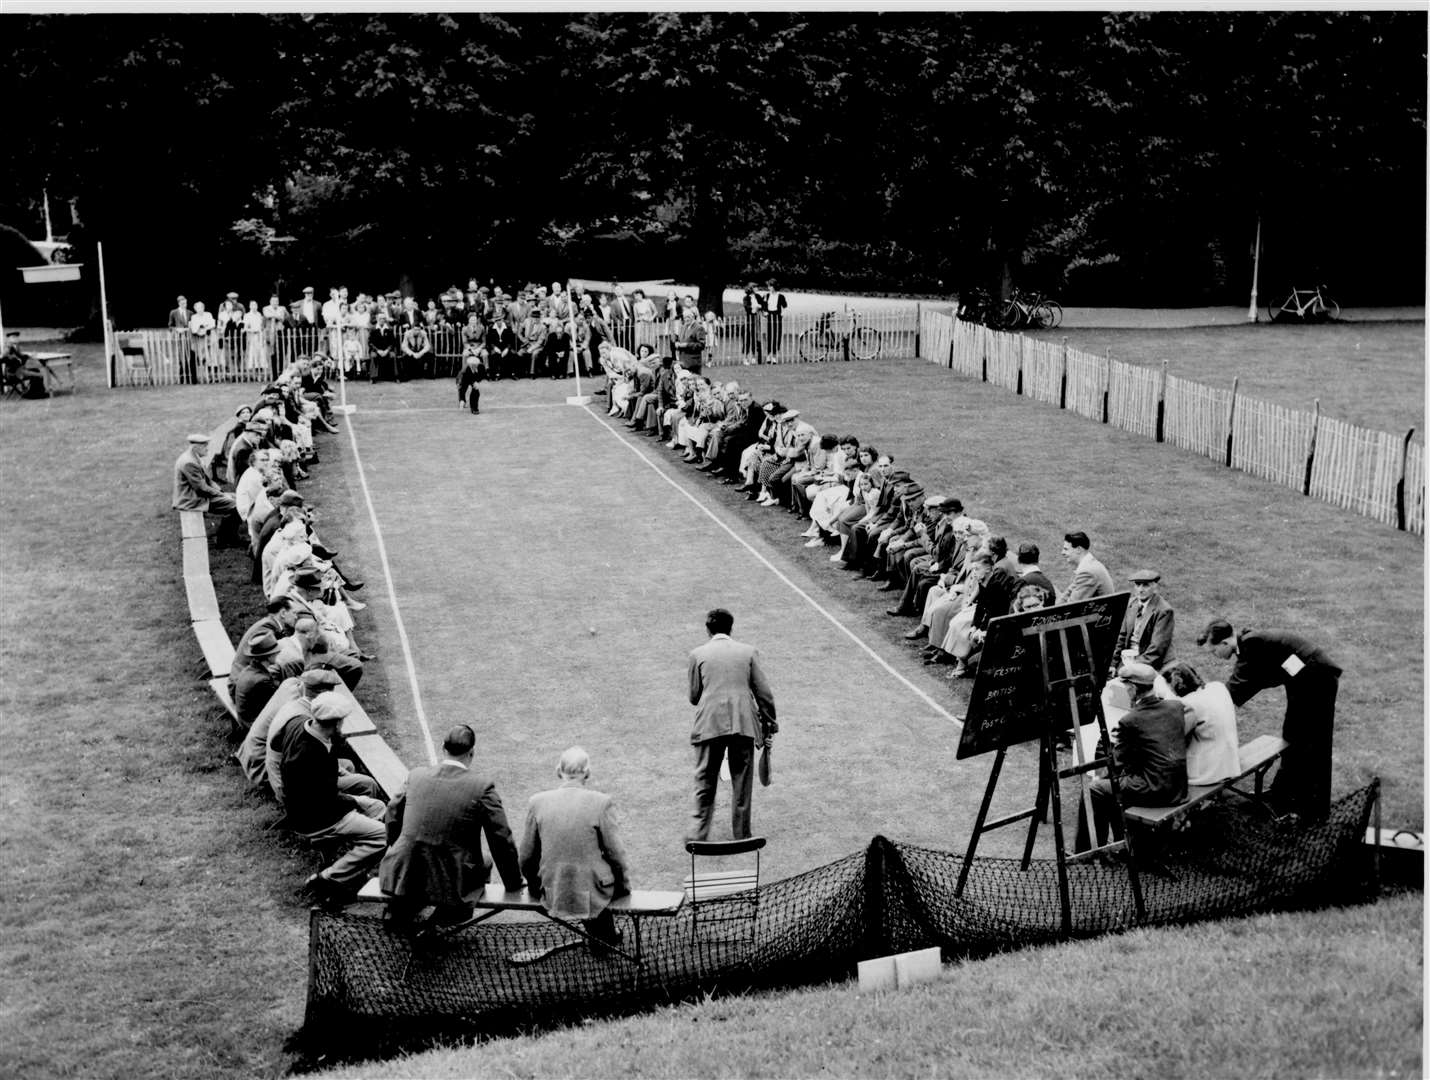 The final of the Canterbury bat and trap festival cup was held in the Dane John in August 1954